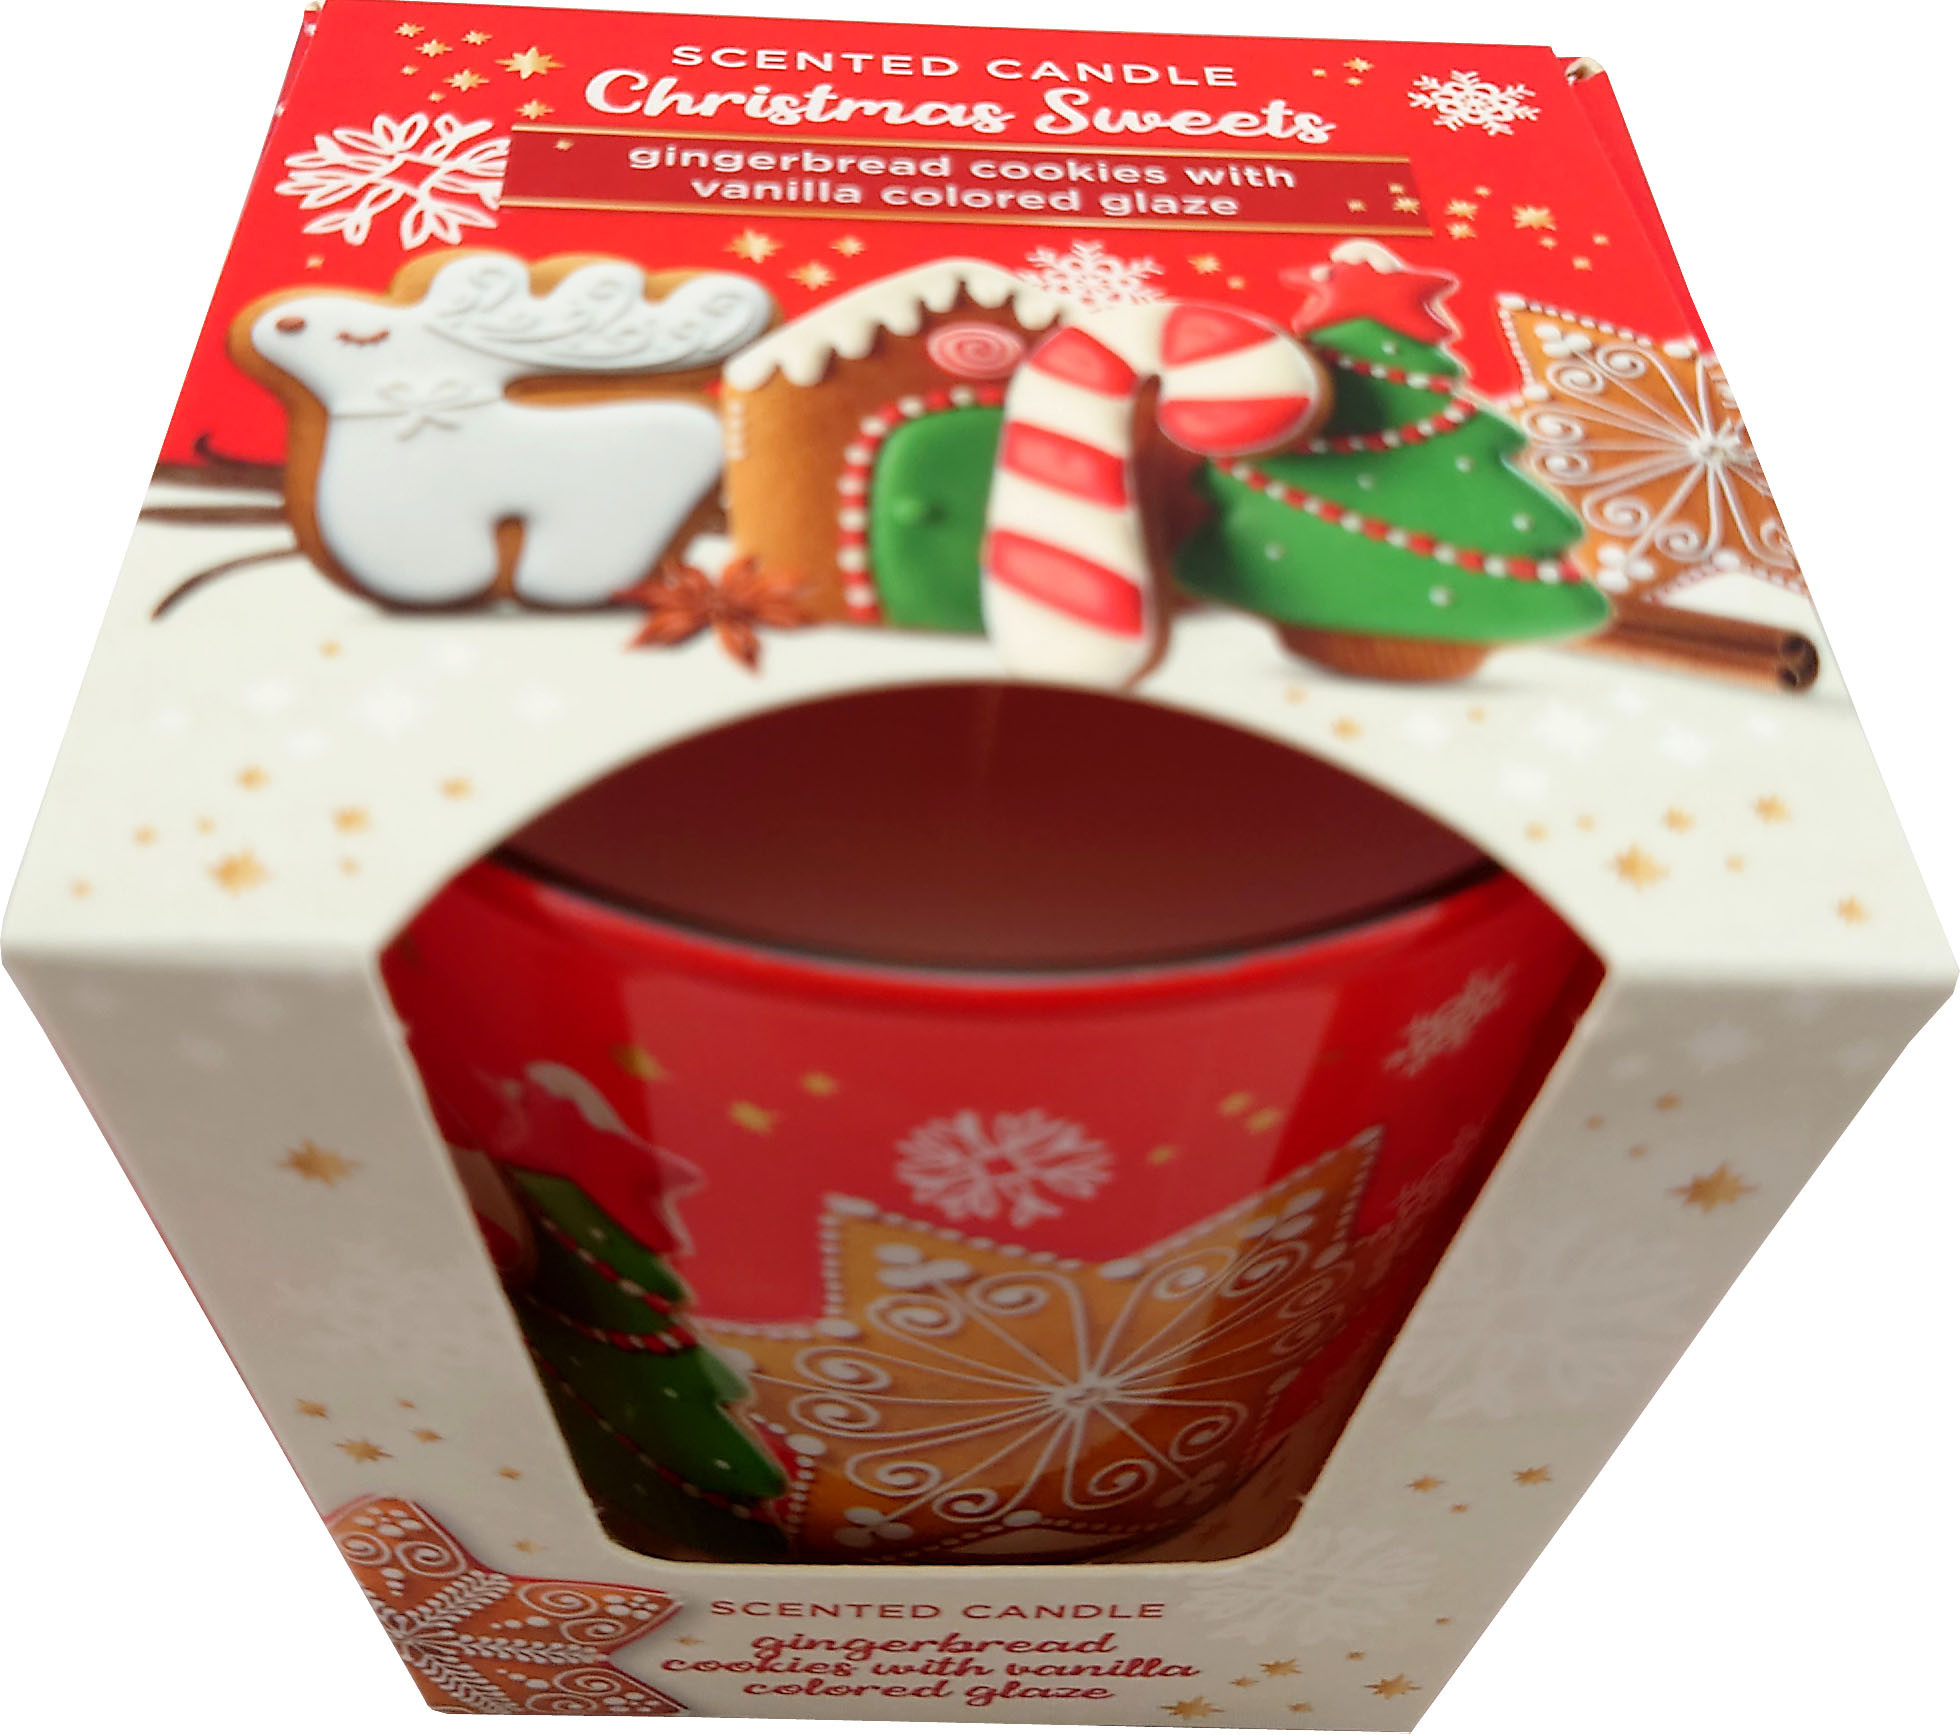 KNOX Duftkerze im Glas, Christmas Sweets - gingerbread cookies with vanilla colored glaze